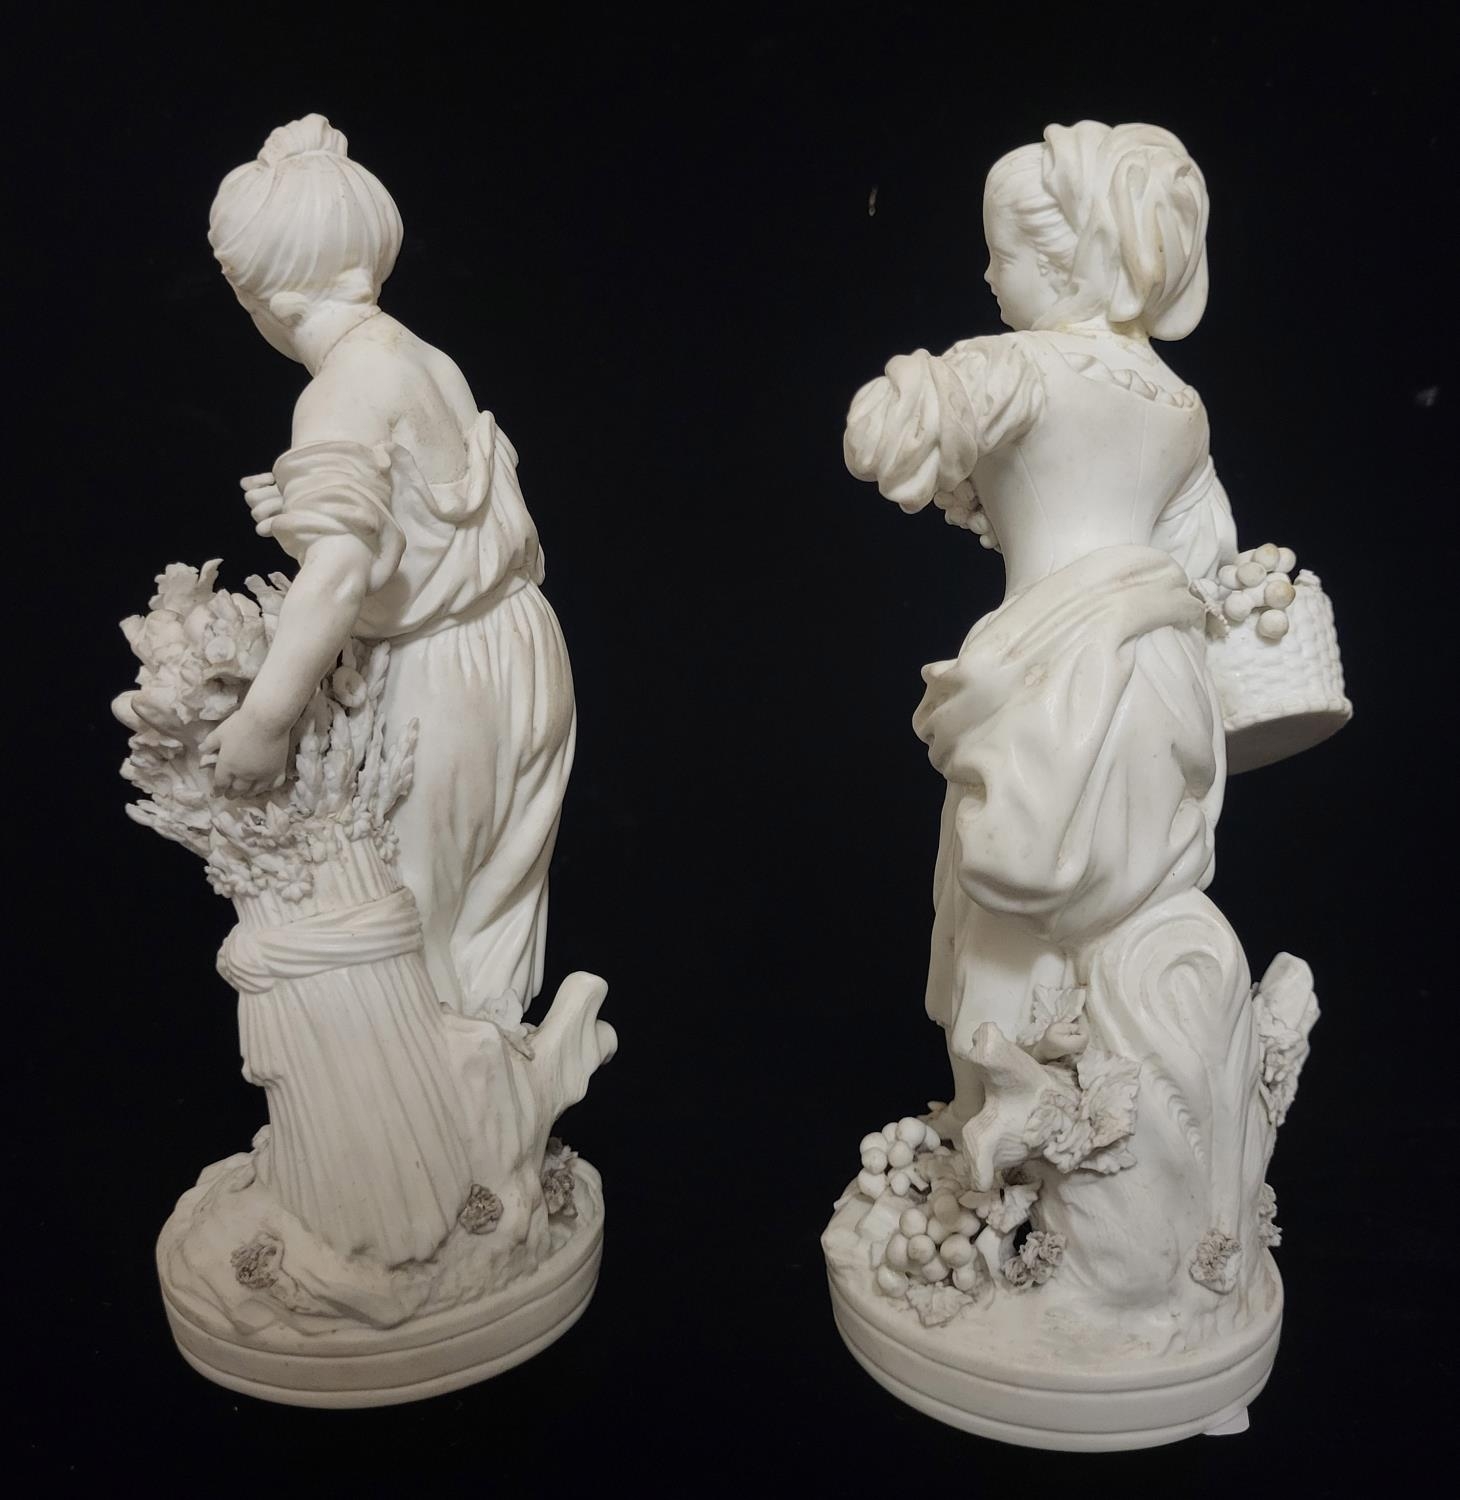 A PAIR OF EARLY 19TH CENTURY DERBY BLANC DE CHINE PORCELAIN FIGURES Female characters wearing period - Image 9 of 11